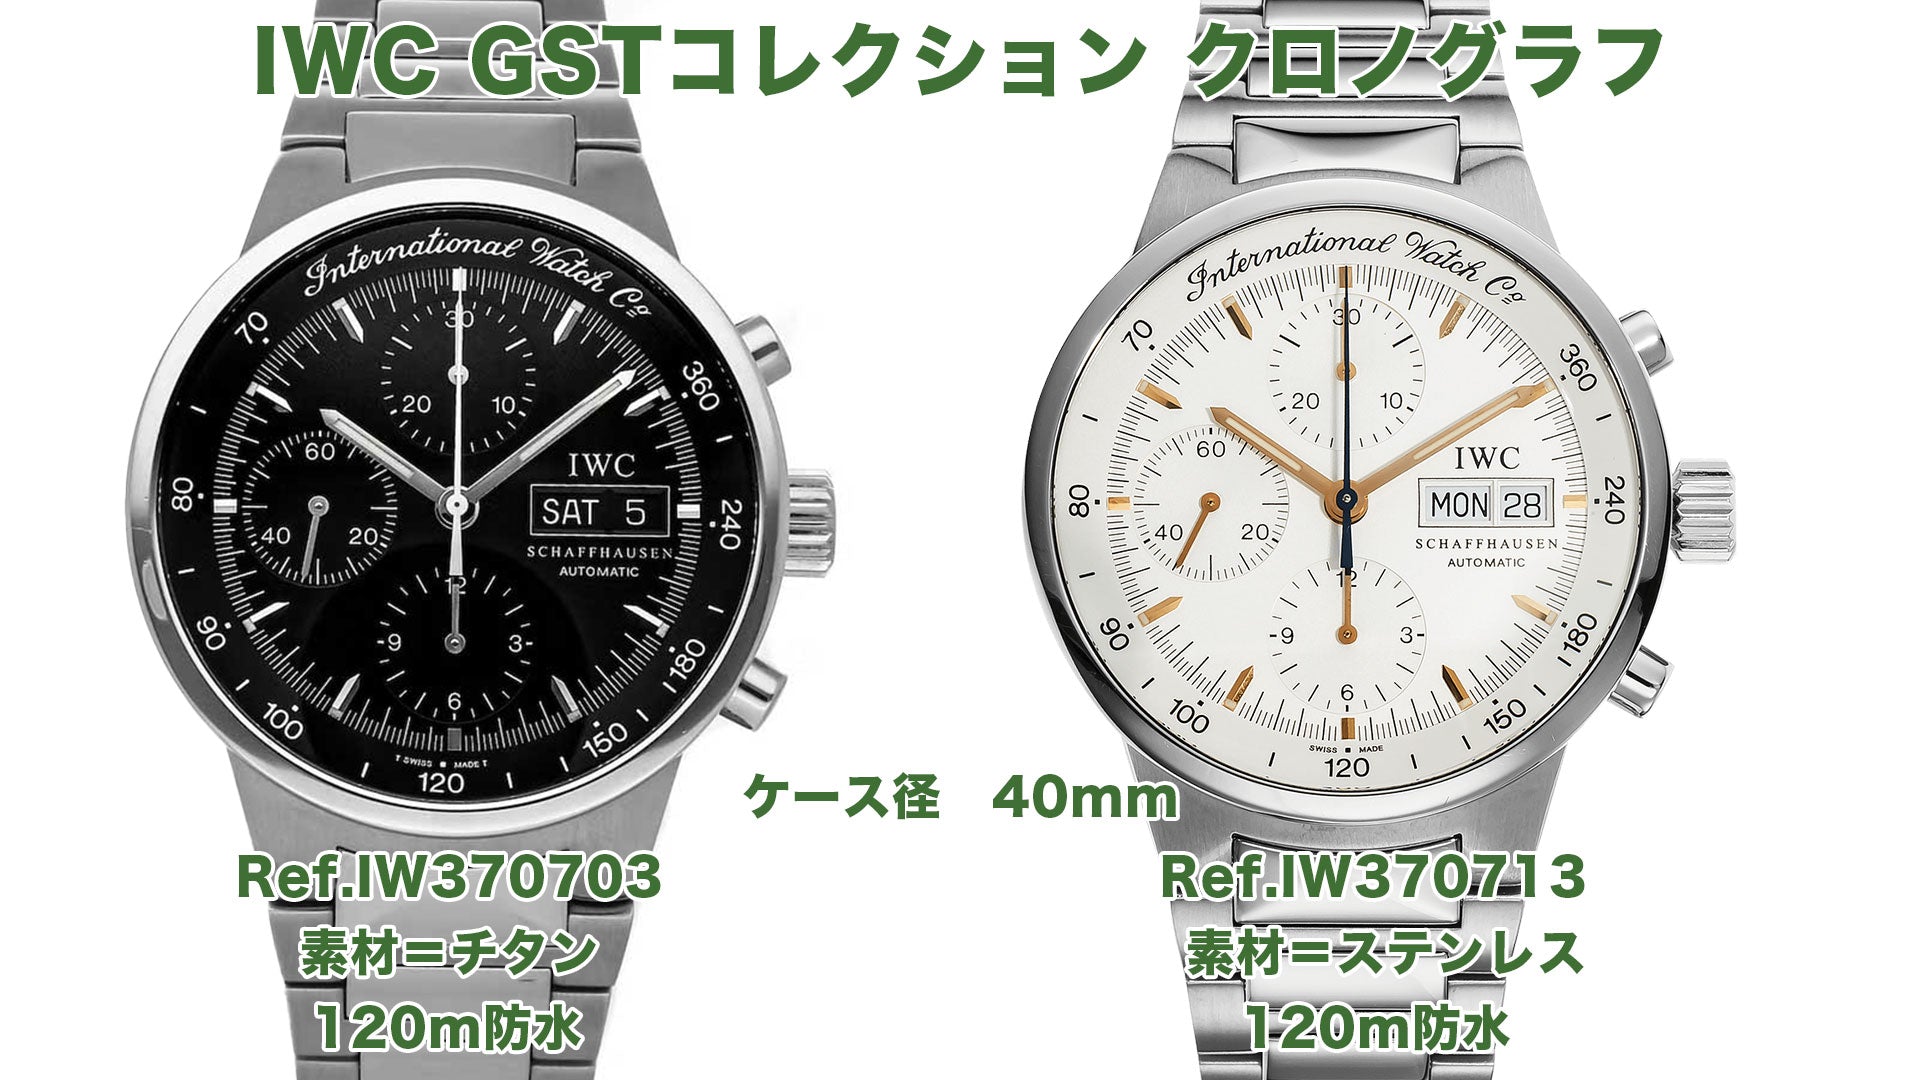 IWC GST Collection Chronograph Ref.370703 & Ref.370713